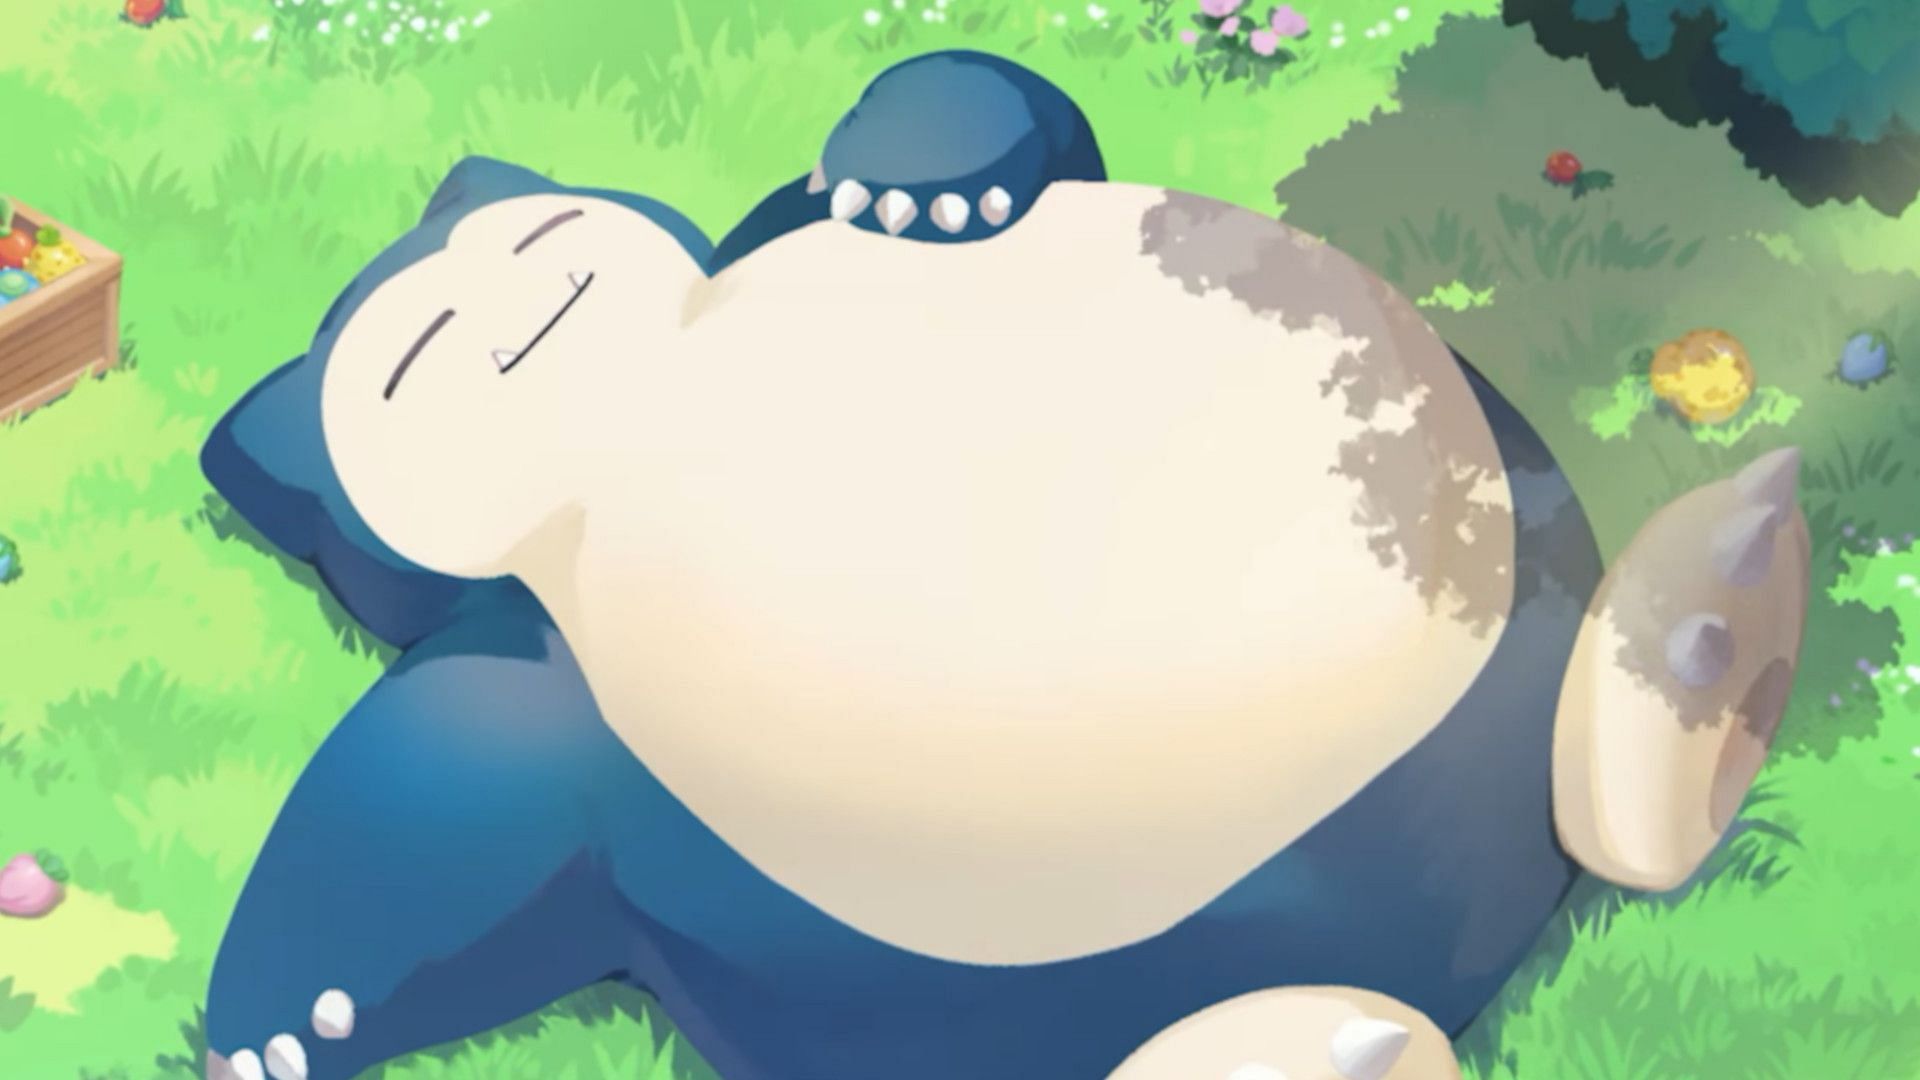 Pokemon Sleep is a new application intended to assist trainers in their sleep hygiene (Image via The Pokemon Company)